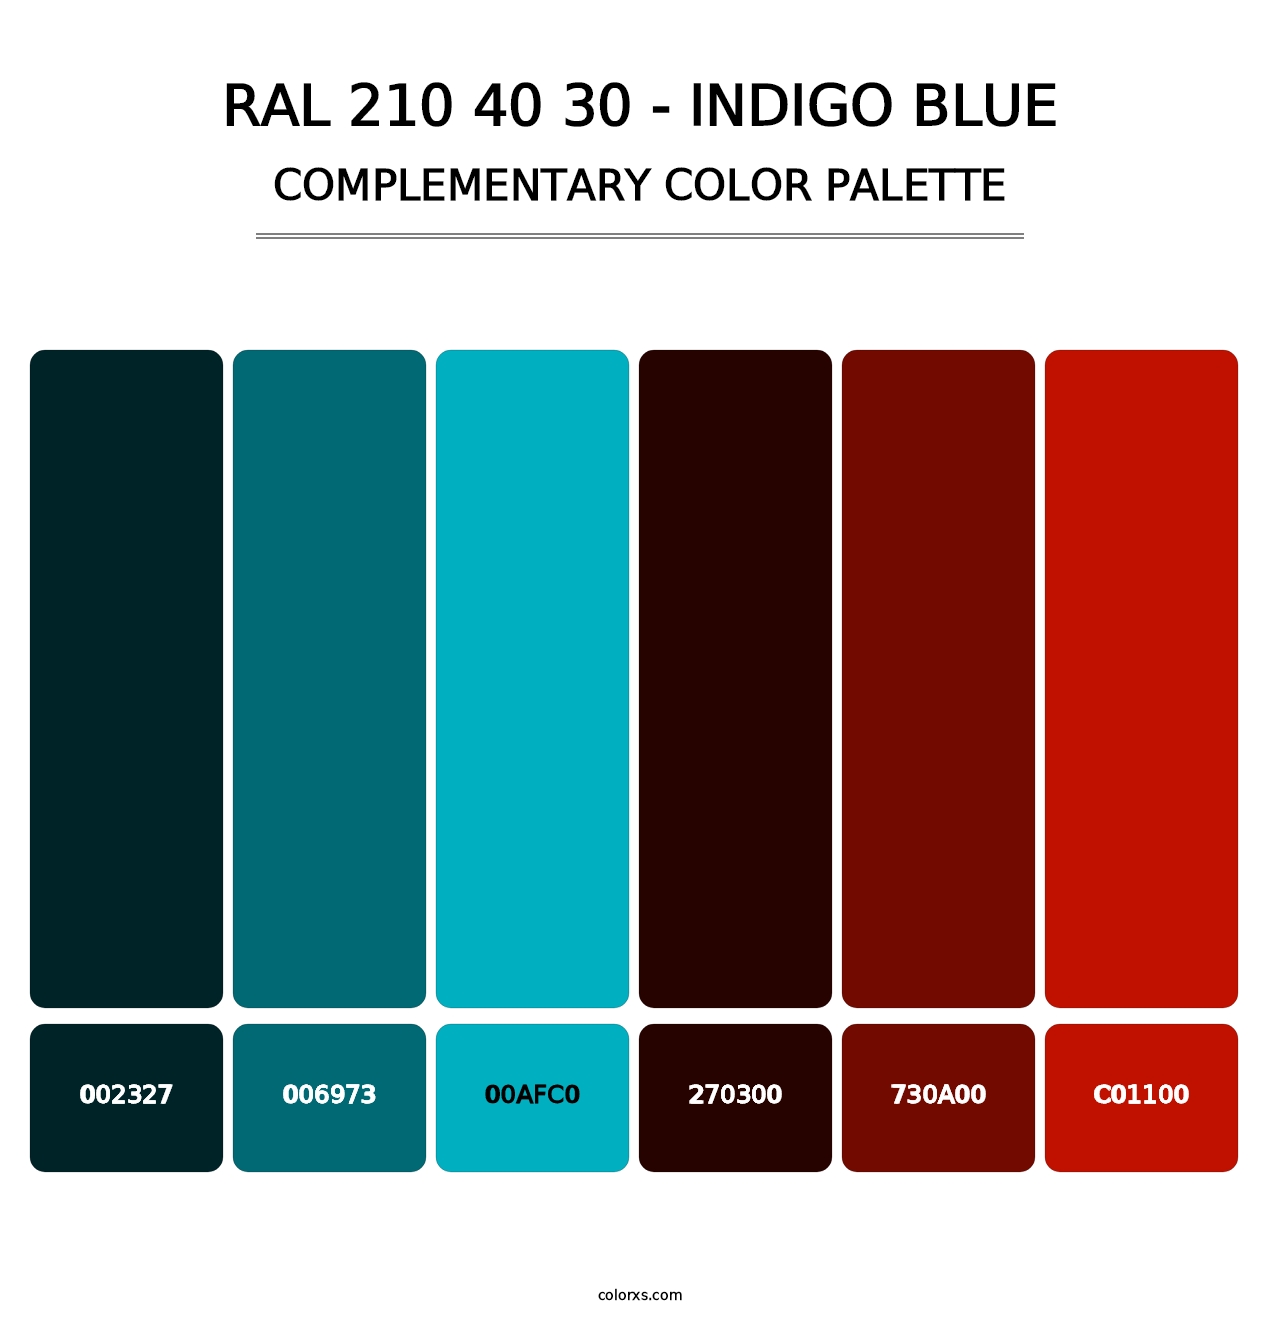 RAL 210 40 30 - Indigo Blue - Complementary Color Palette